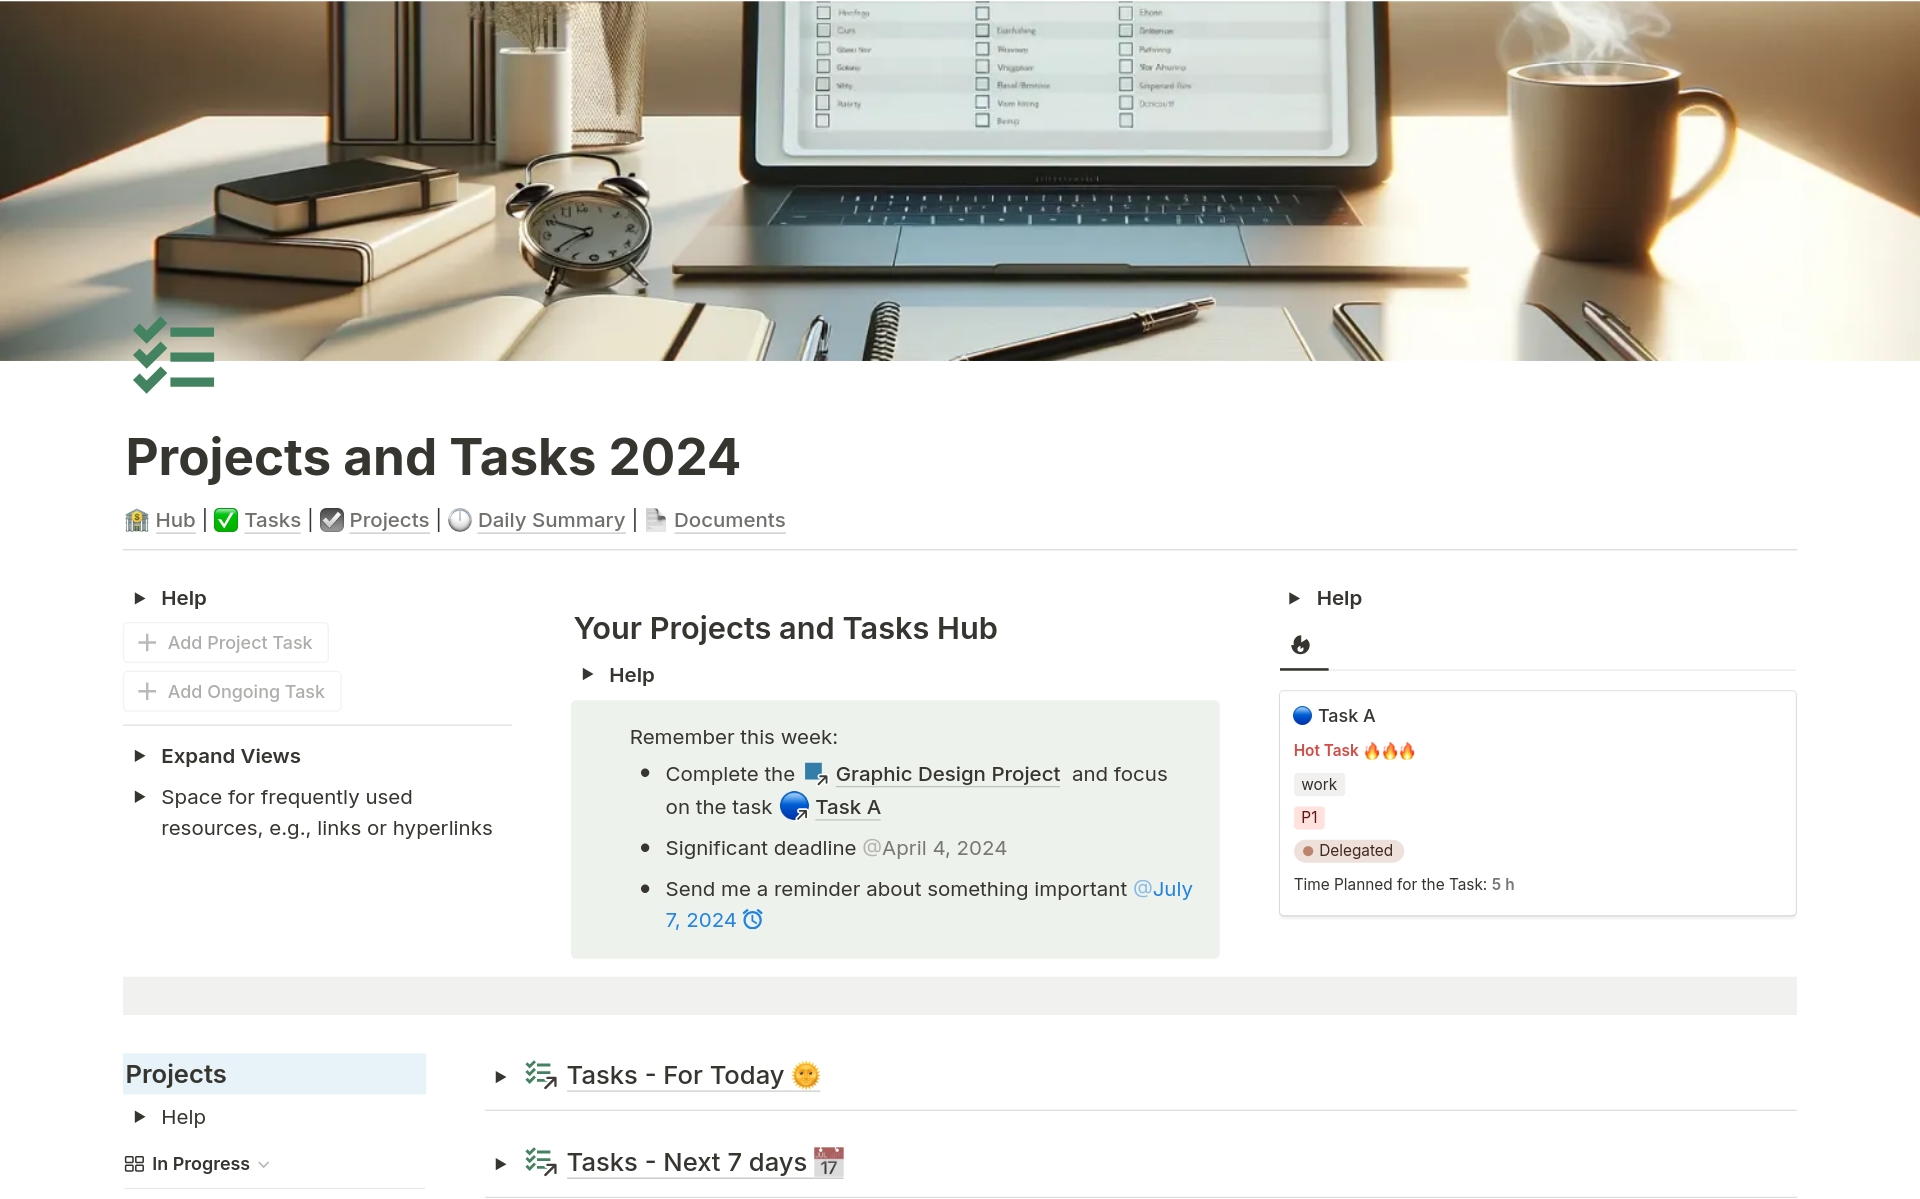 Streamline your projects and tasks with this template. Drag & drop, time tracking, and Kanban views turn chaos into success. Free, efficient, designed for everyone.